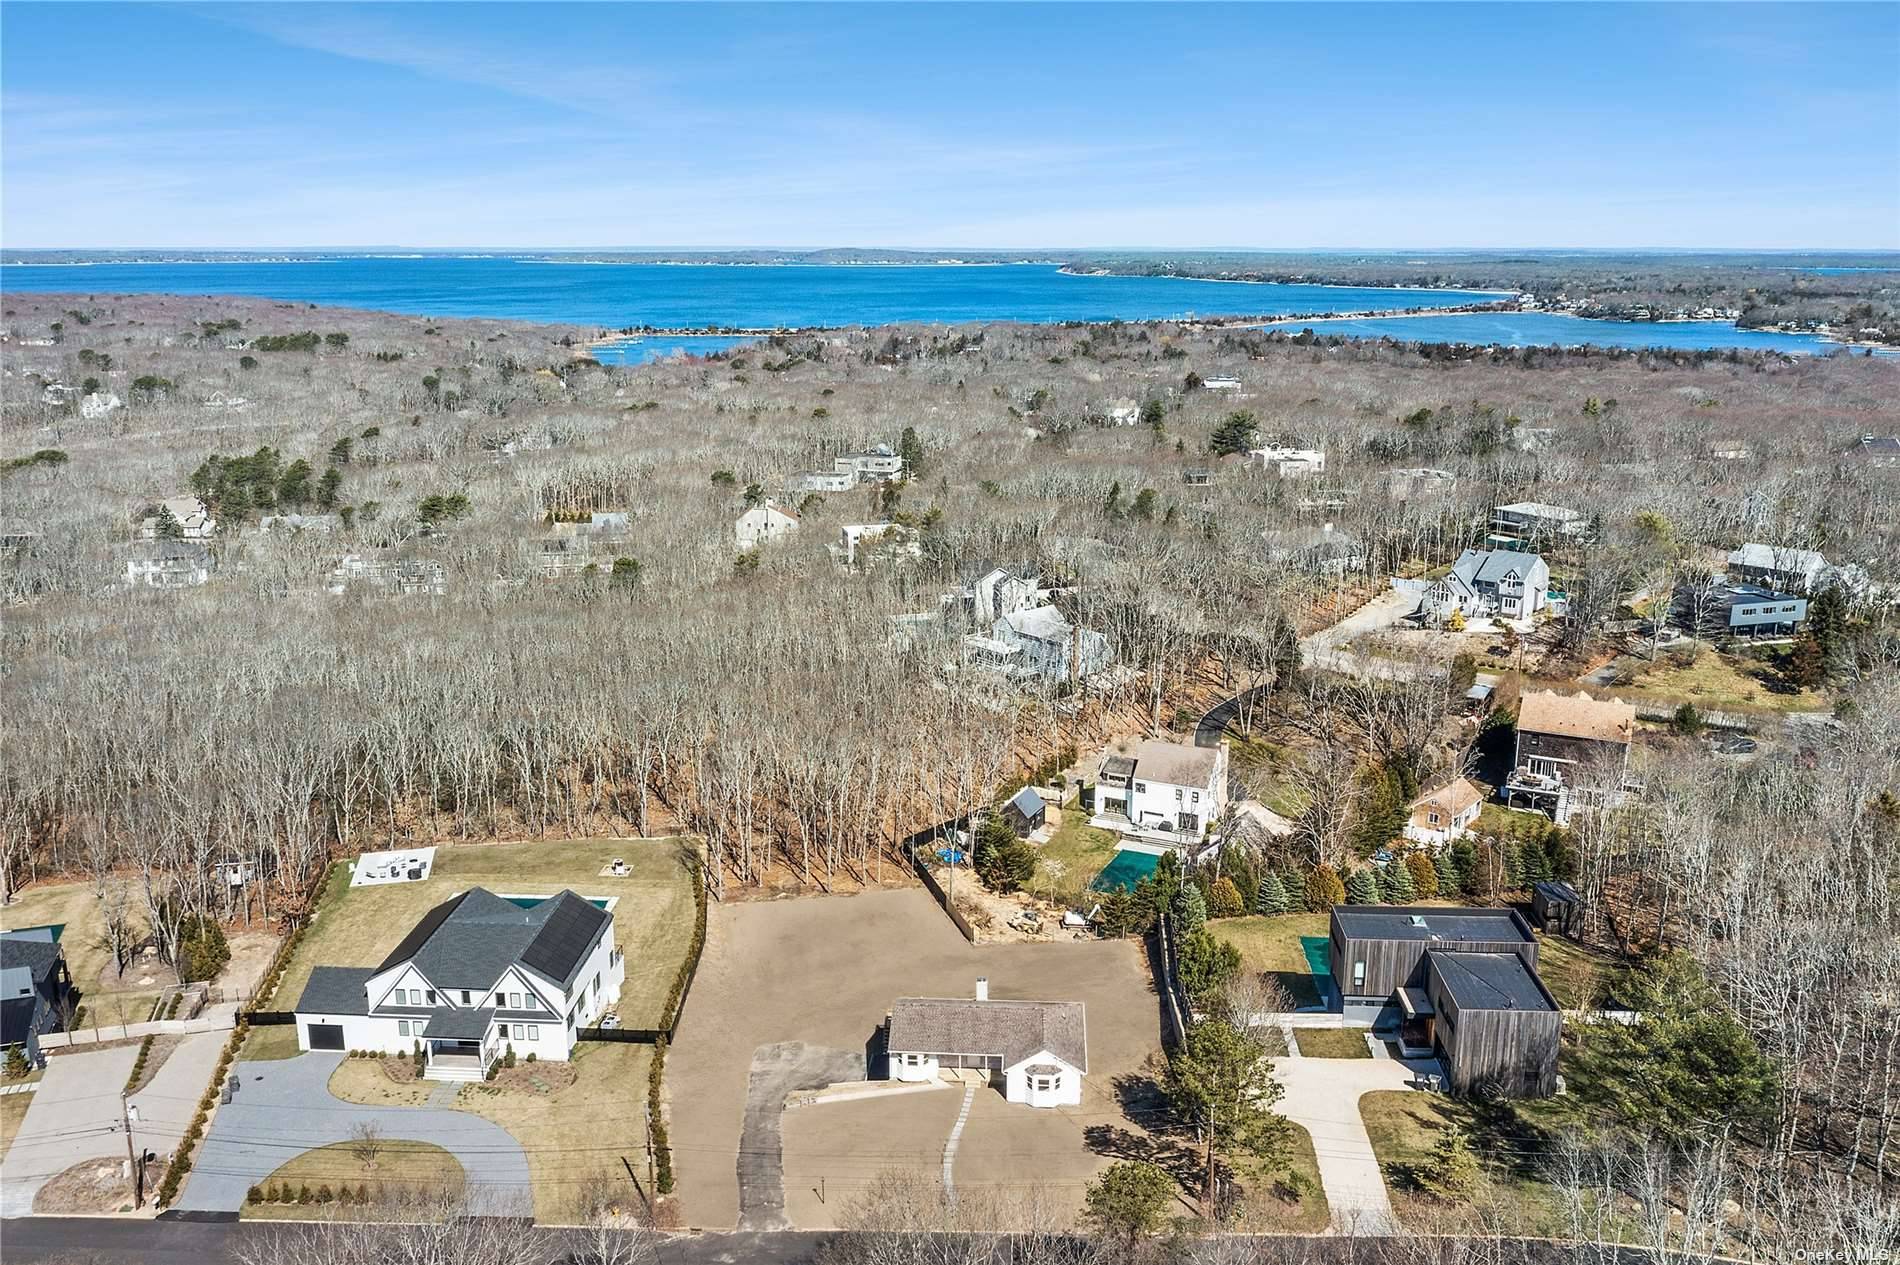 Minutes to Sag Harbor Village, lies this opportunity to further renovate or build your own custom home to suit your needs.